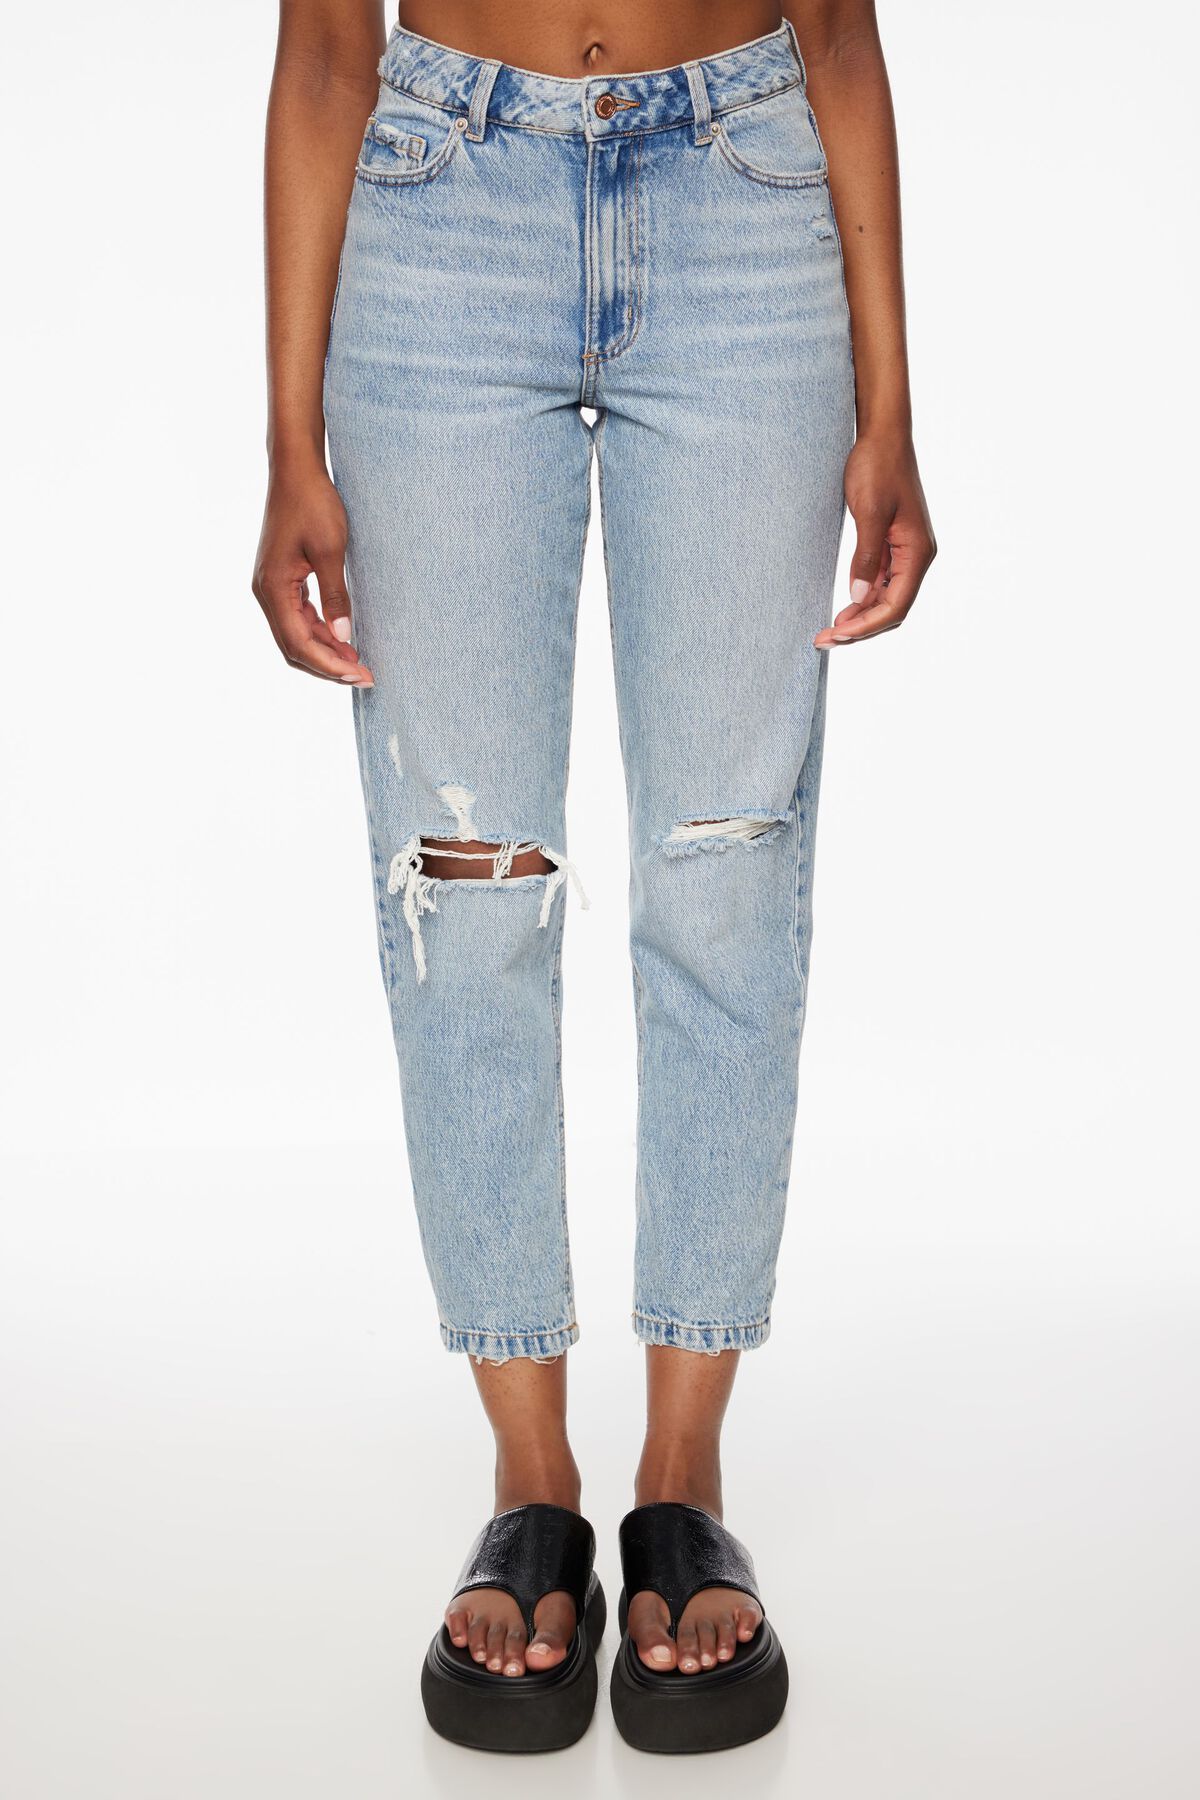 Dynamite Claudia Ultra High Waisted Jeans. 2